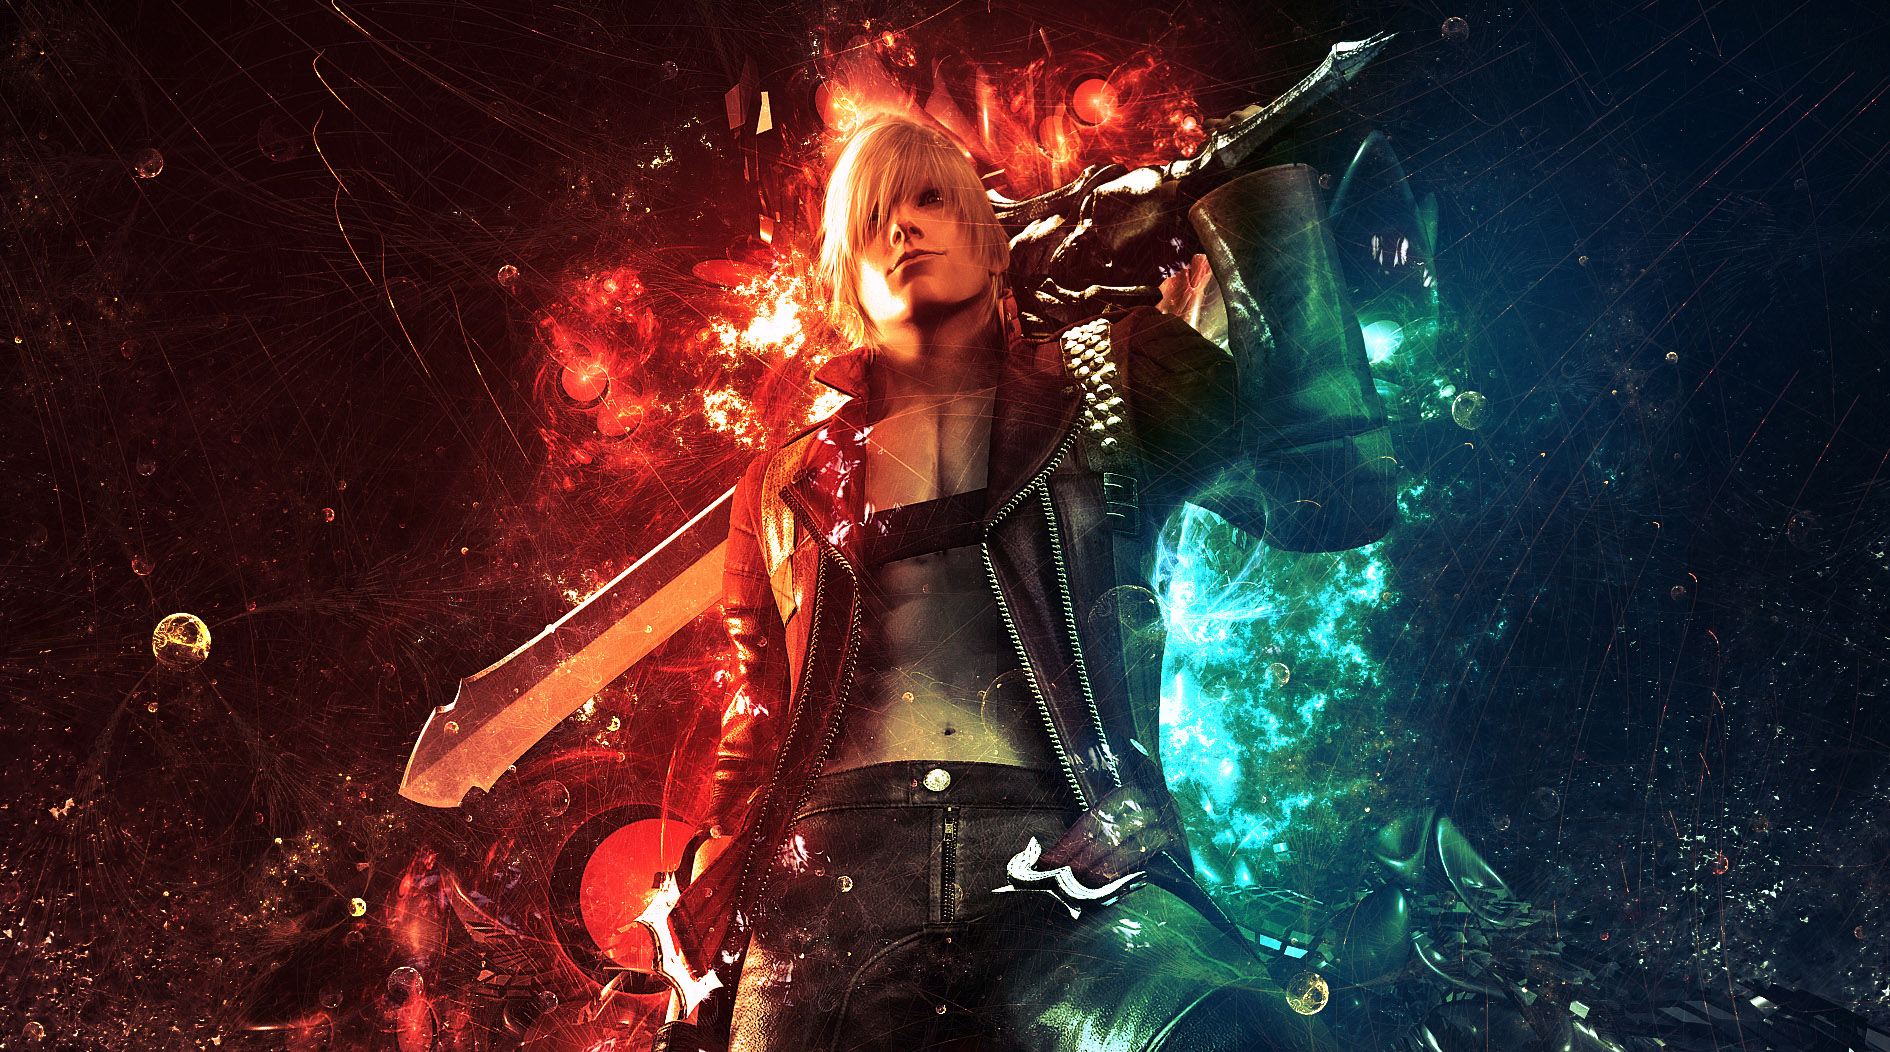 Remember That - Dante Devil May Cry 3 Cosplay by L by